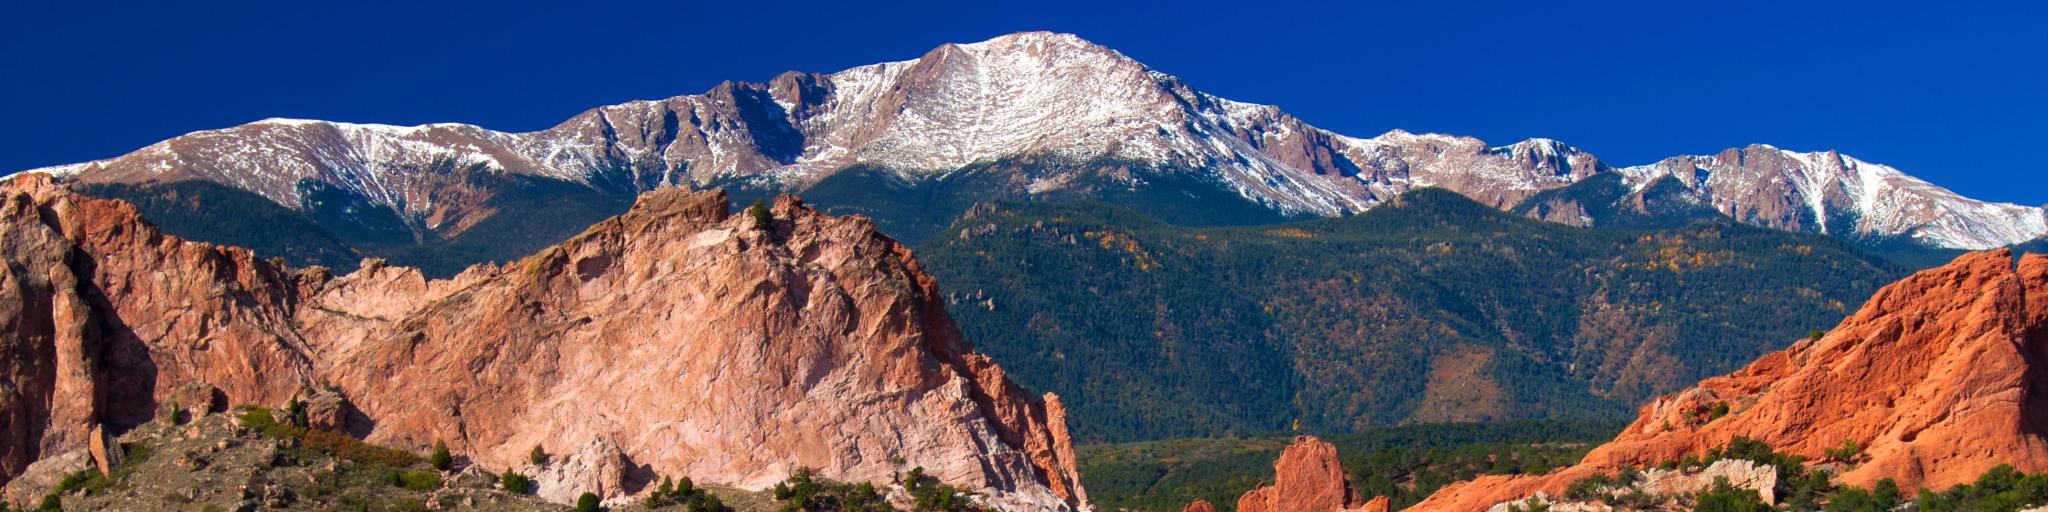 Garden of the Gods, Colorado Springs, USA with a beautiful view of the Garden of the Gods Park with Pikes Peak soaring in the background, taken on a sunny clear day.